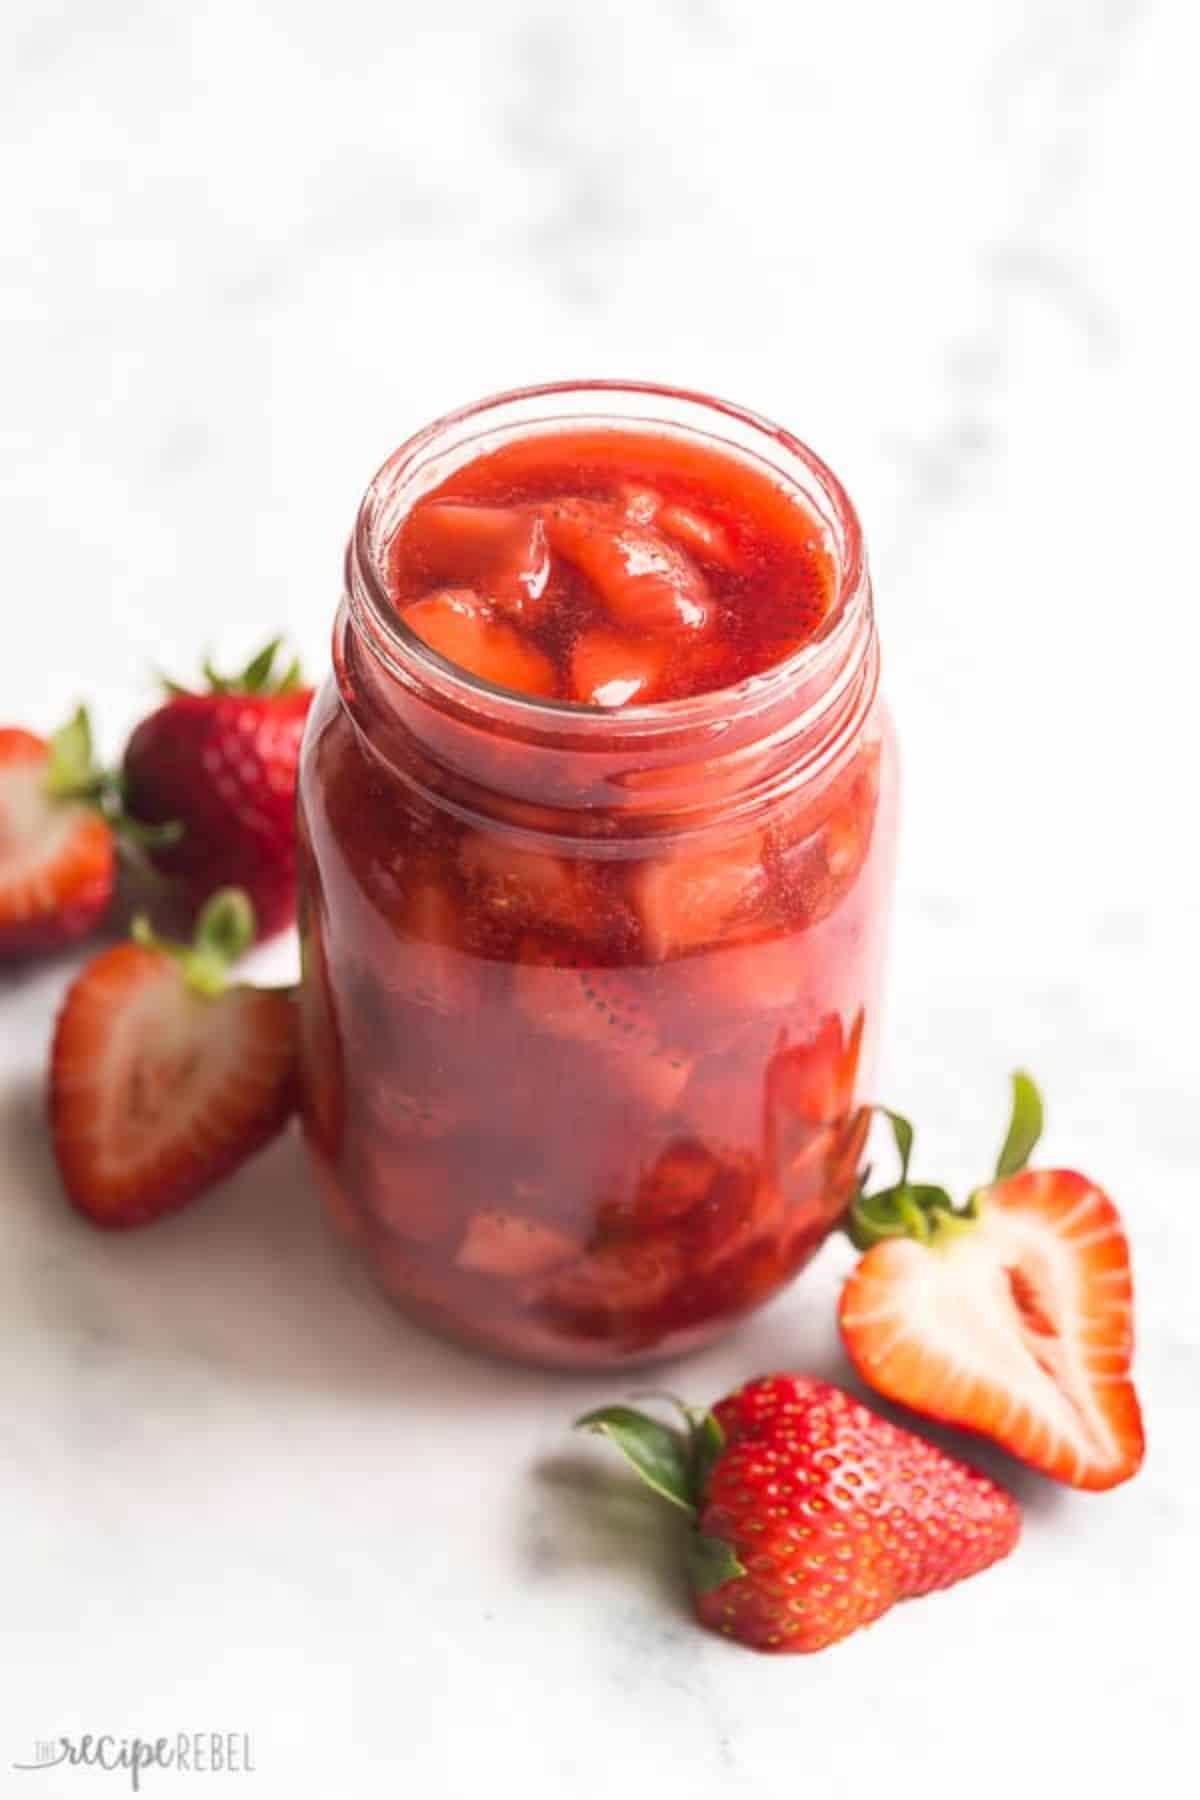 Juicy strawberry sauce in a glass jar.